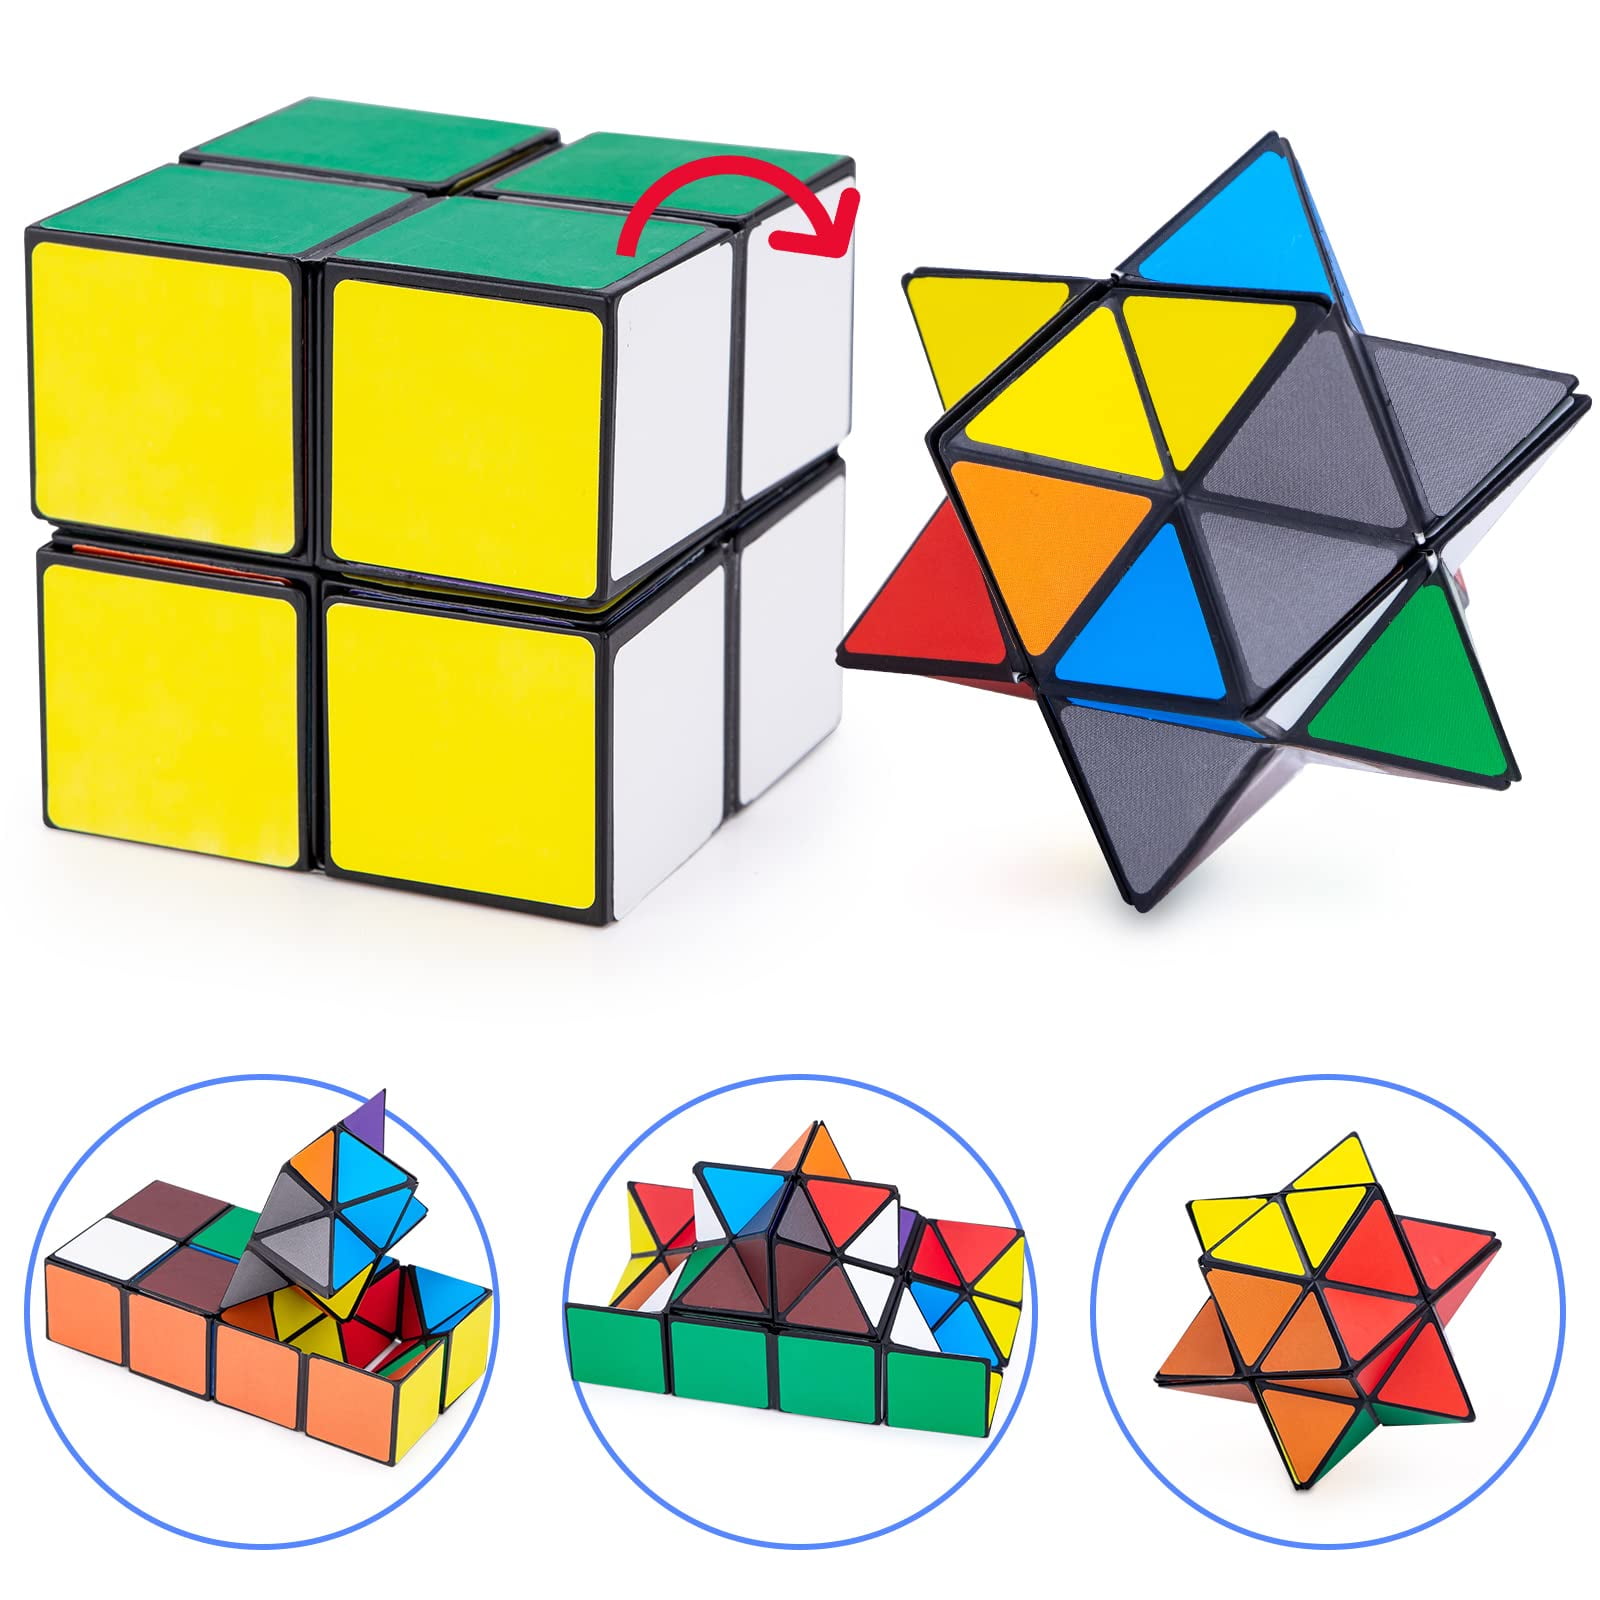 Details about   Fidget Toy Rubik's Cube Stress Anxiety Relief Desk Toy For Adults Kids Focus US 